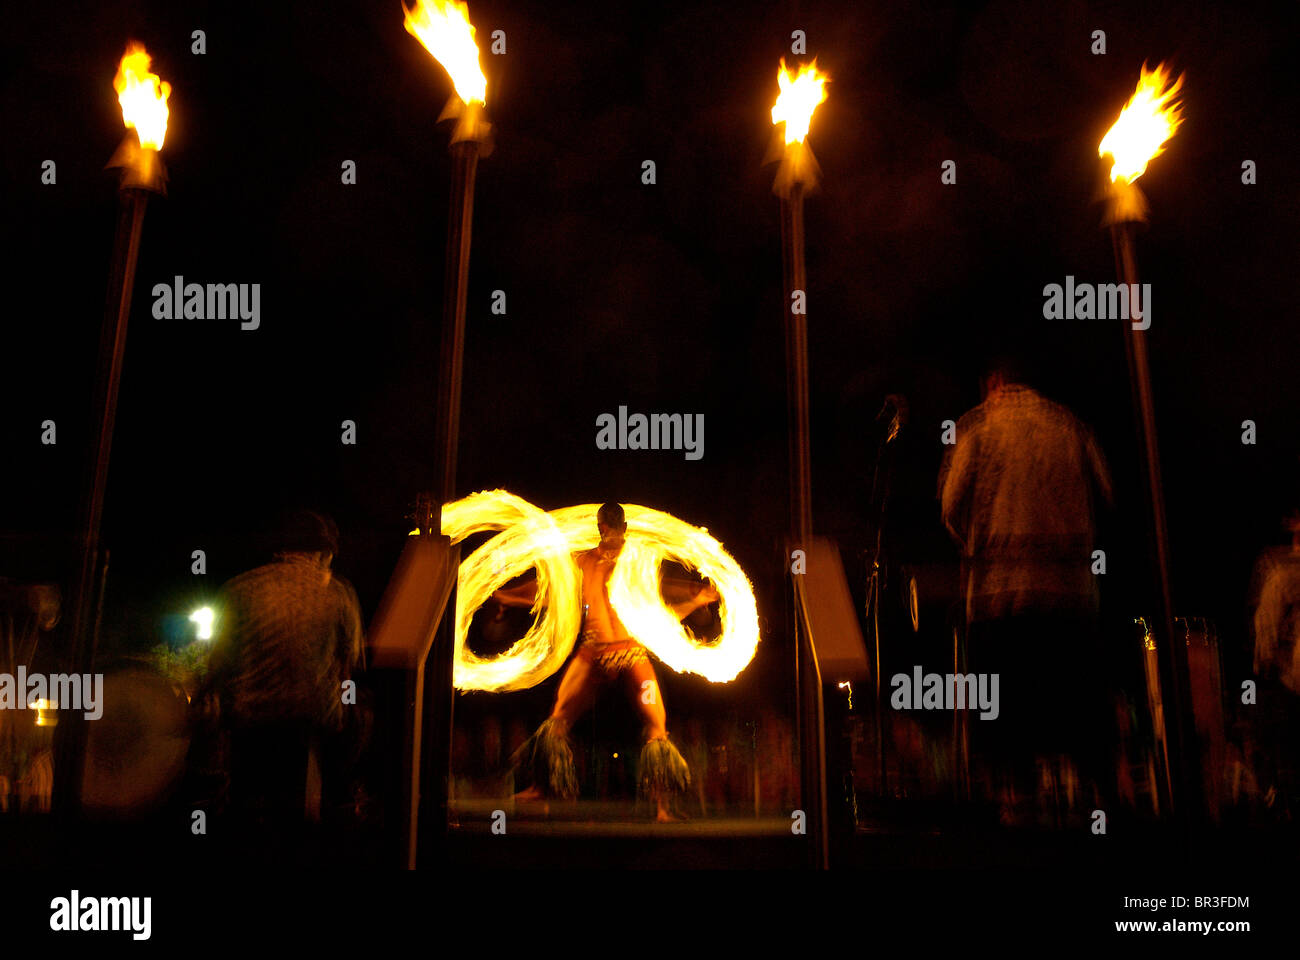 A man performs at a luau on the island of Maui, Hawaii. (motion blur). Stock Photo